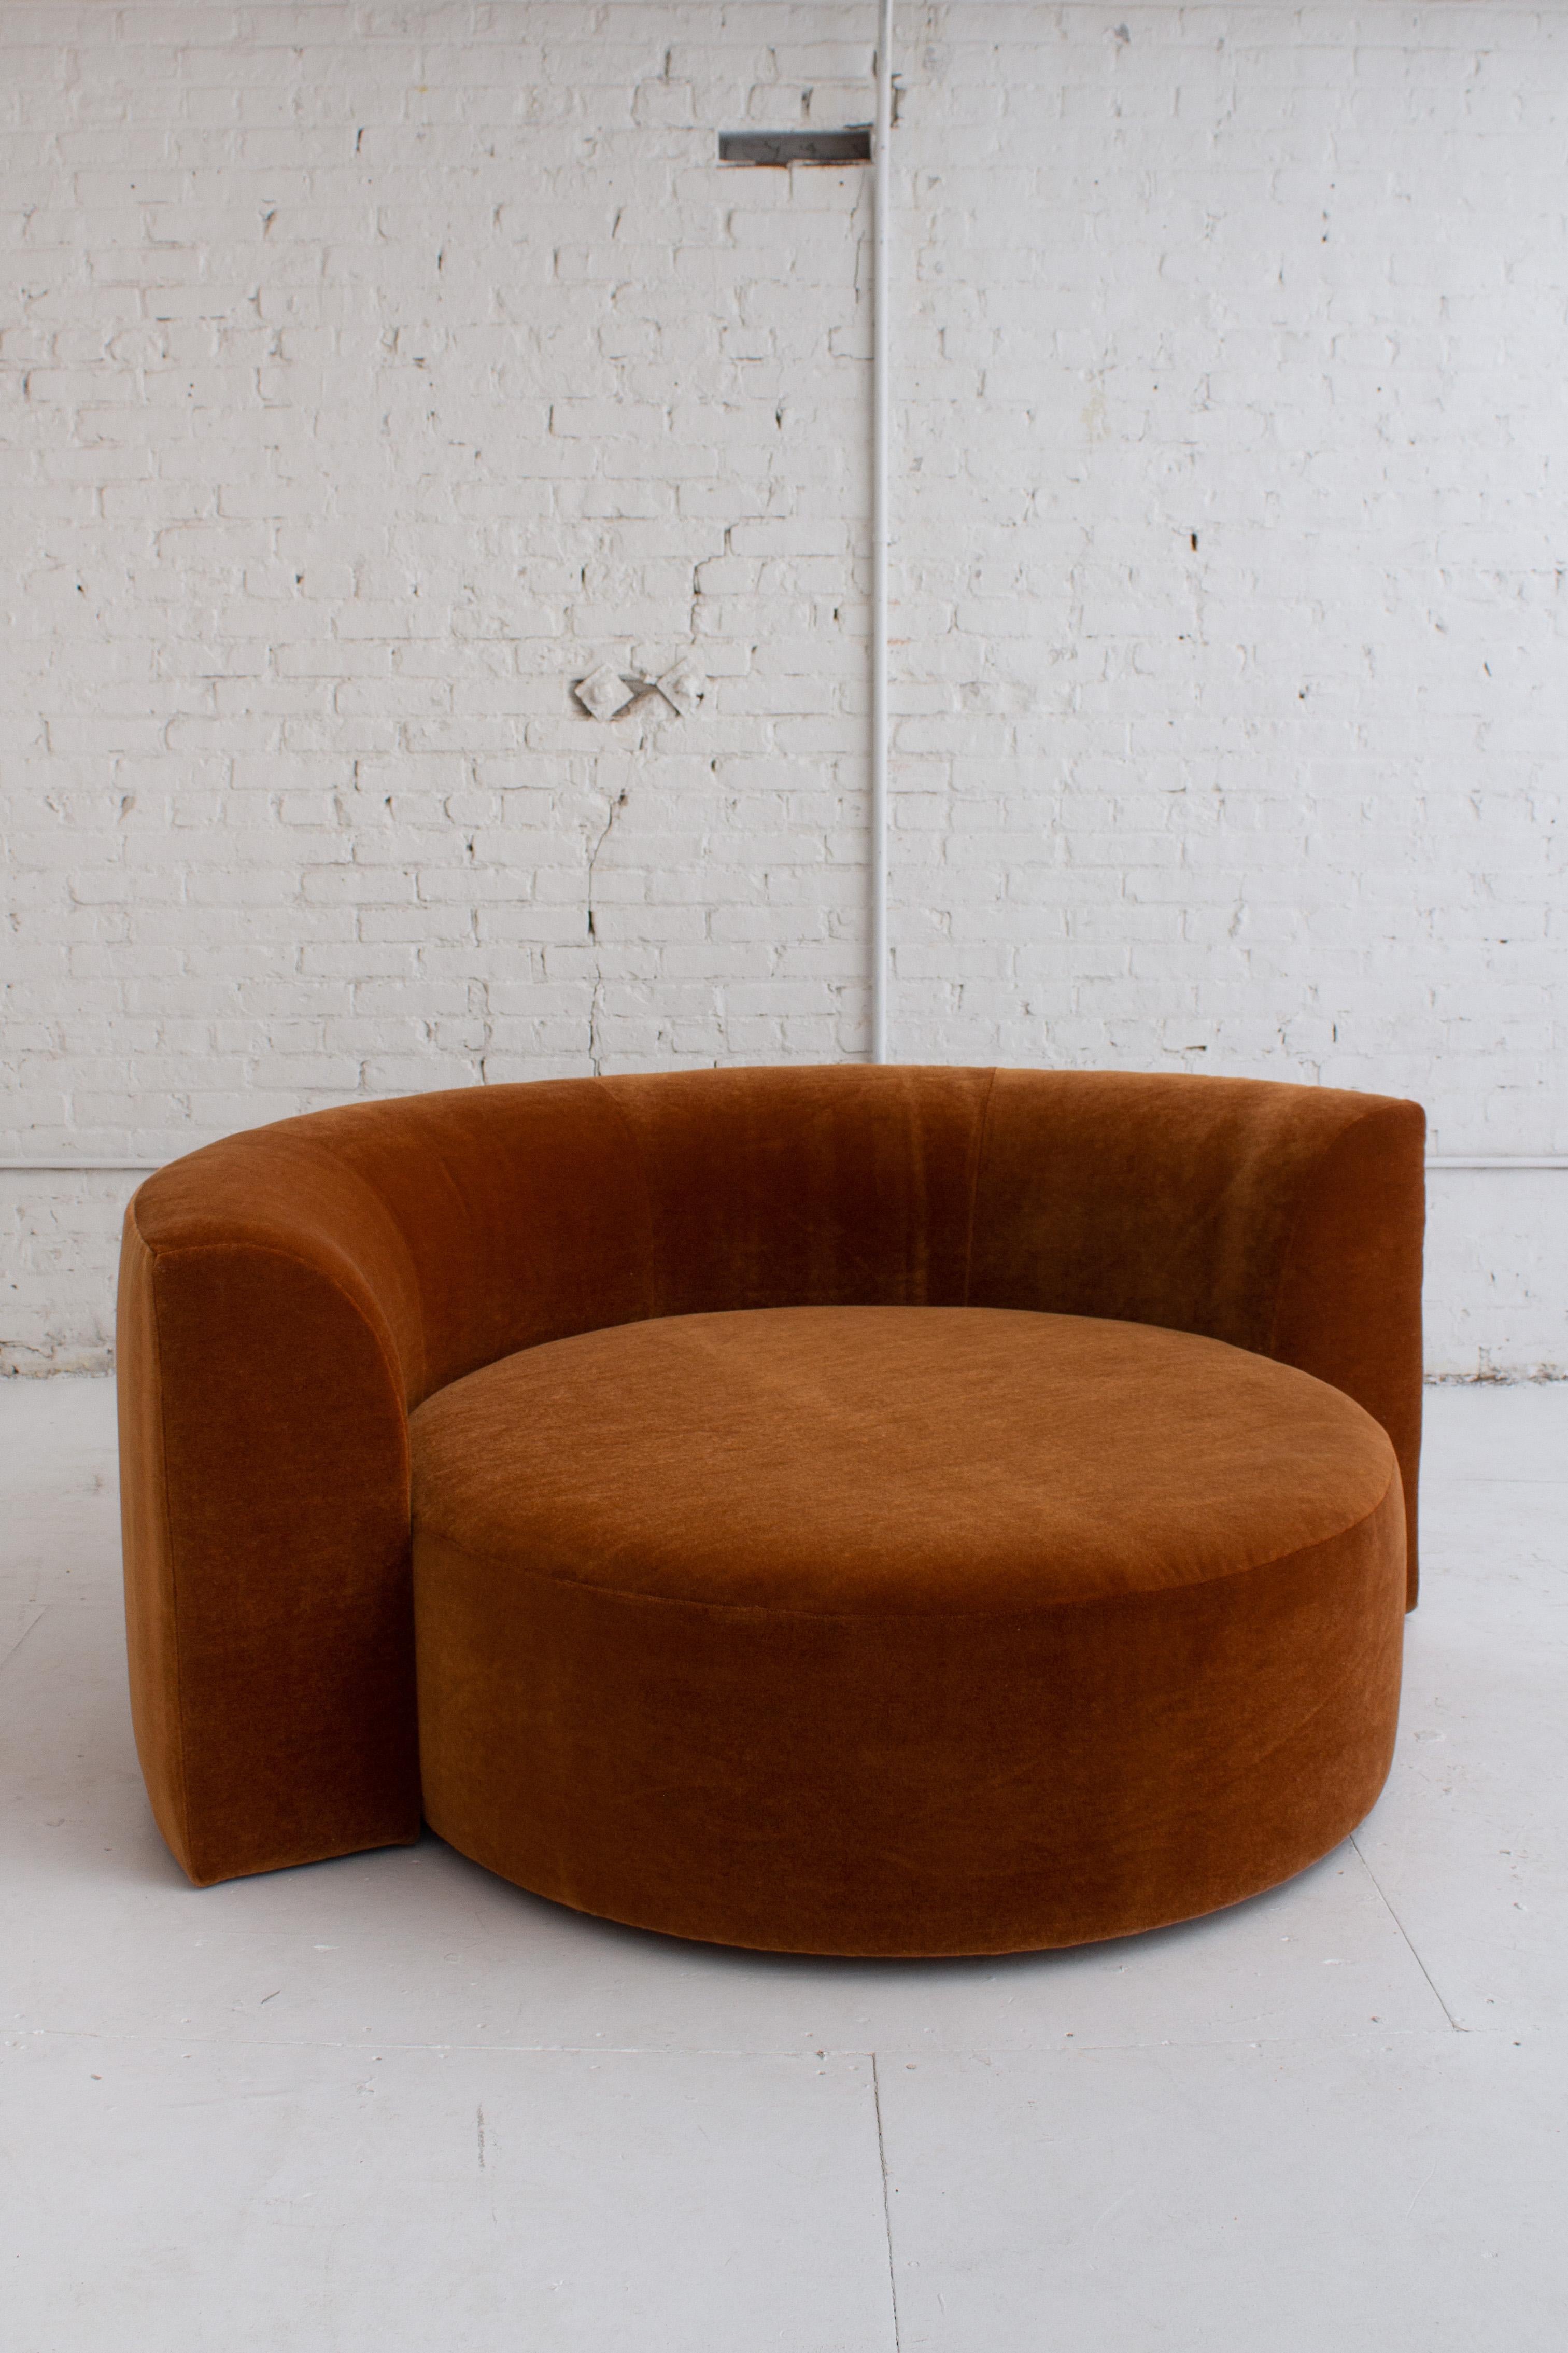 A circular chaise by Roger Rougier. Updated upholstery in a rust mohair. Movable back rest sits on wheels to rotate around center circle. Inner circle measures 47” in diameter by 16” high.